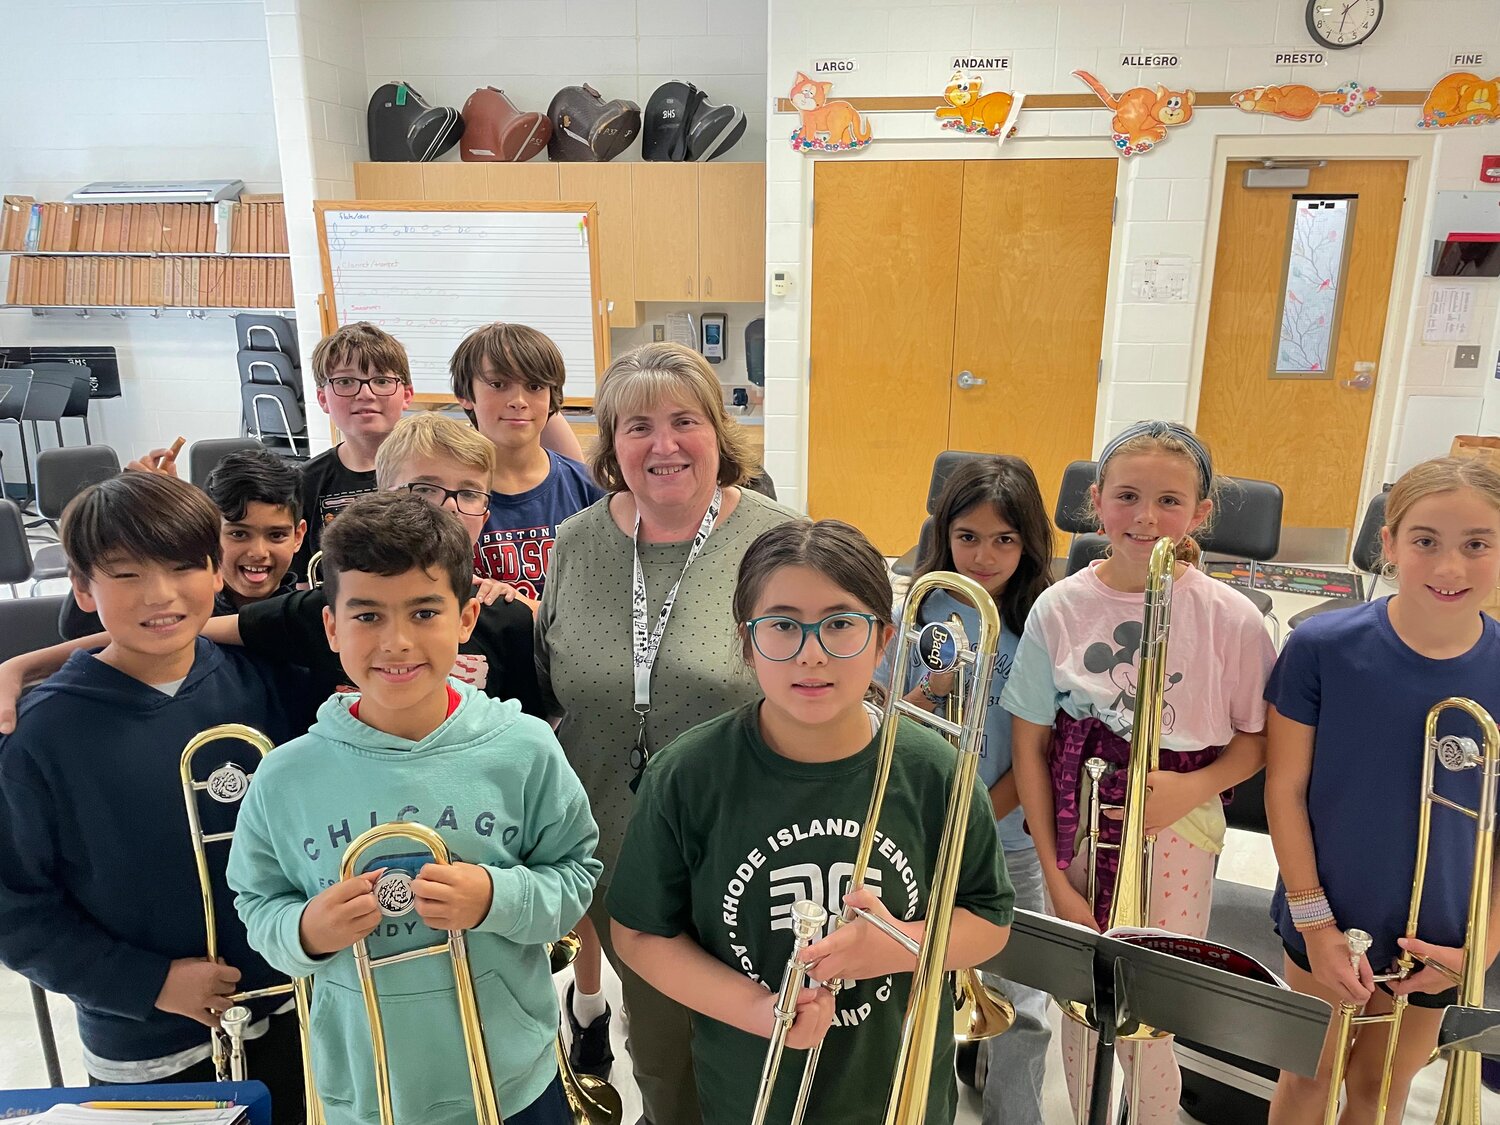 Mrs. Degnan is the band teacher at Hampden Meadows School. Here, she is pictured with some of the students in band.